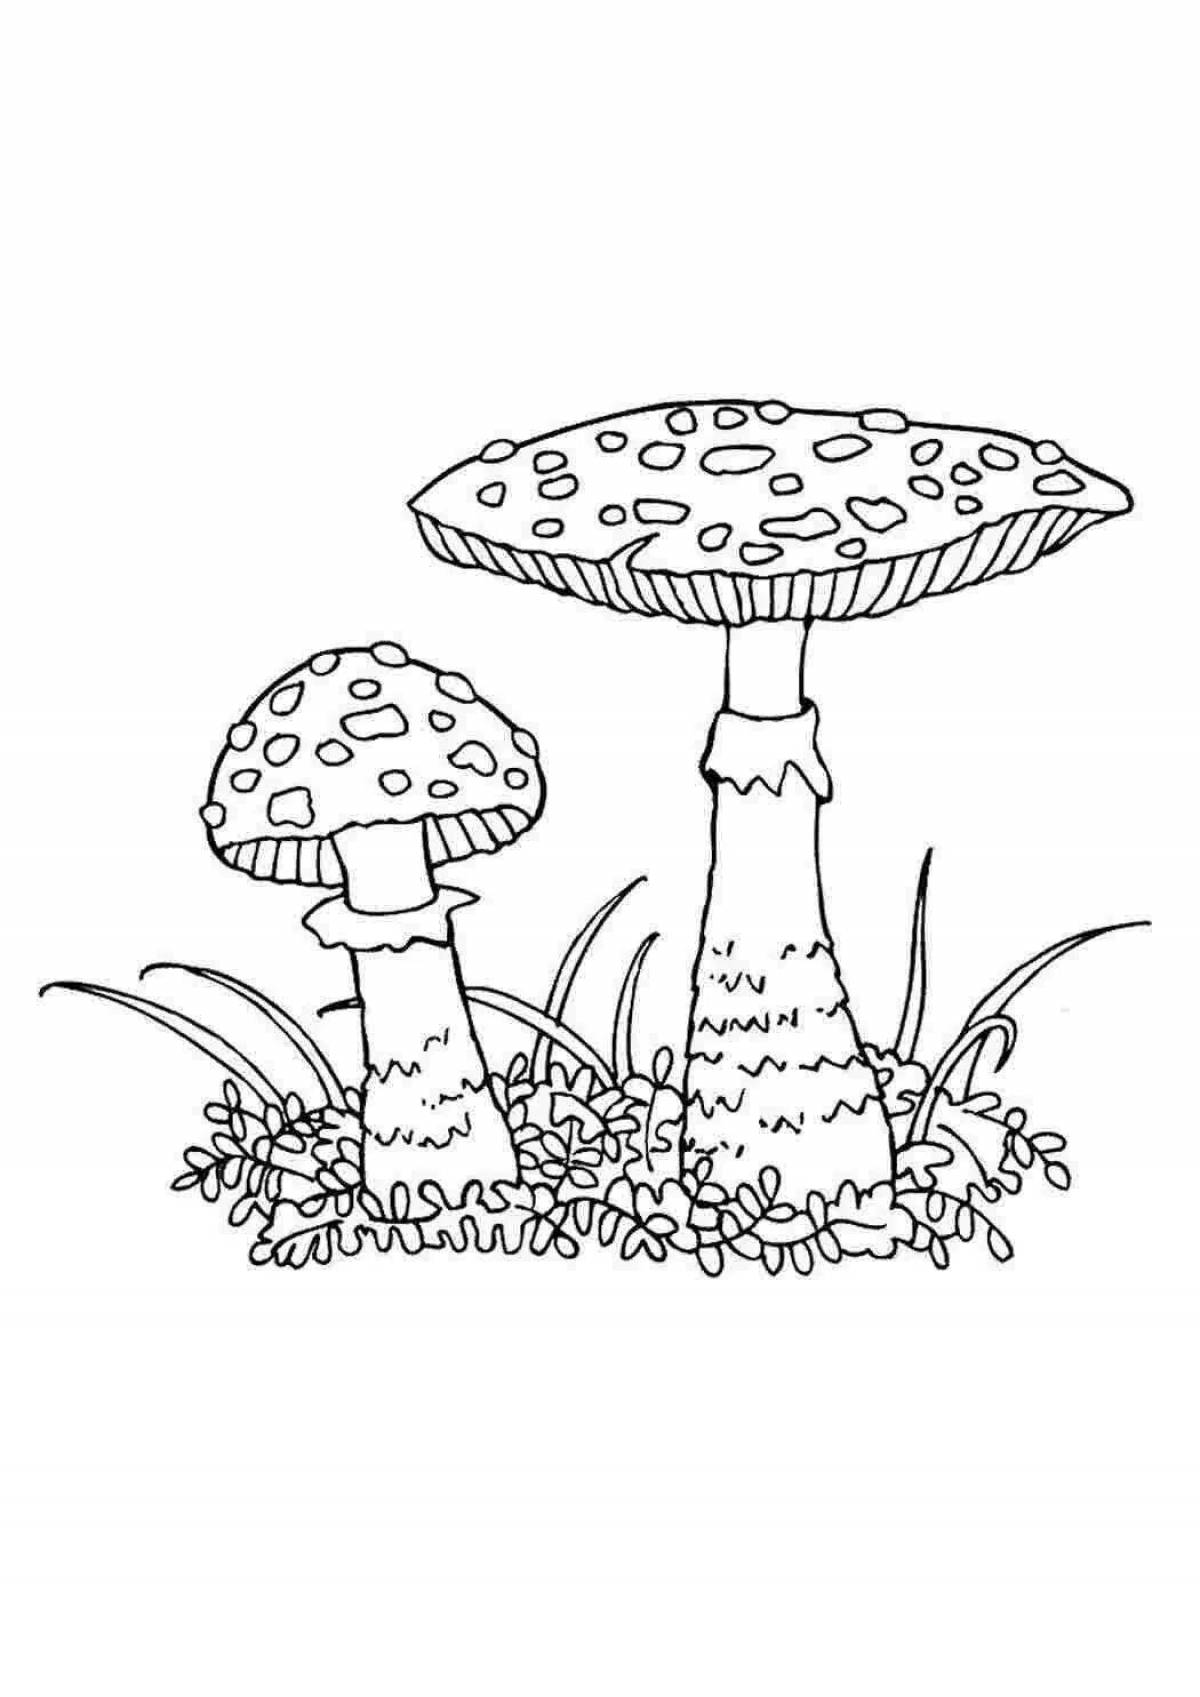 Great toadstool coloring page